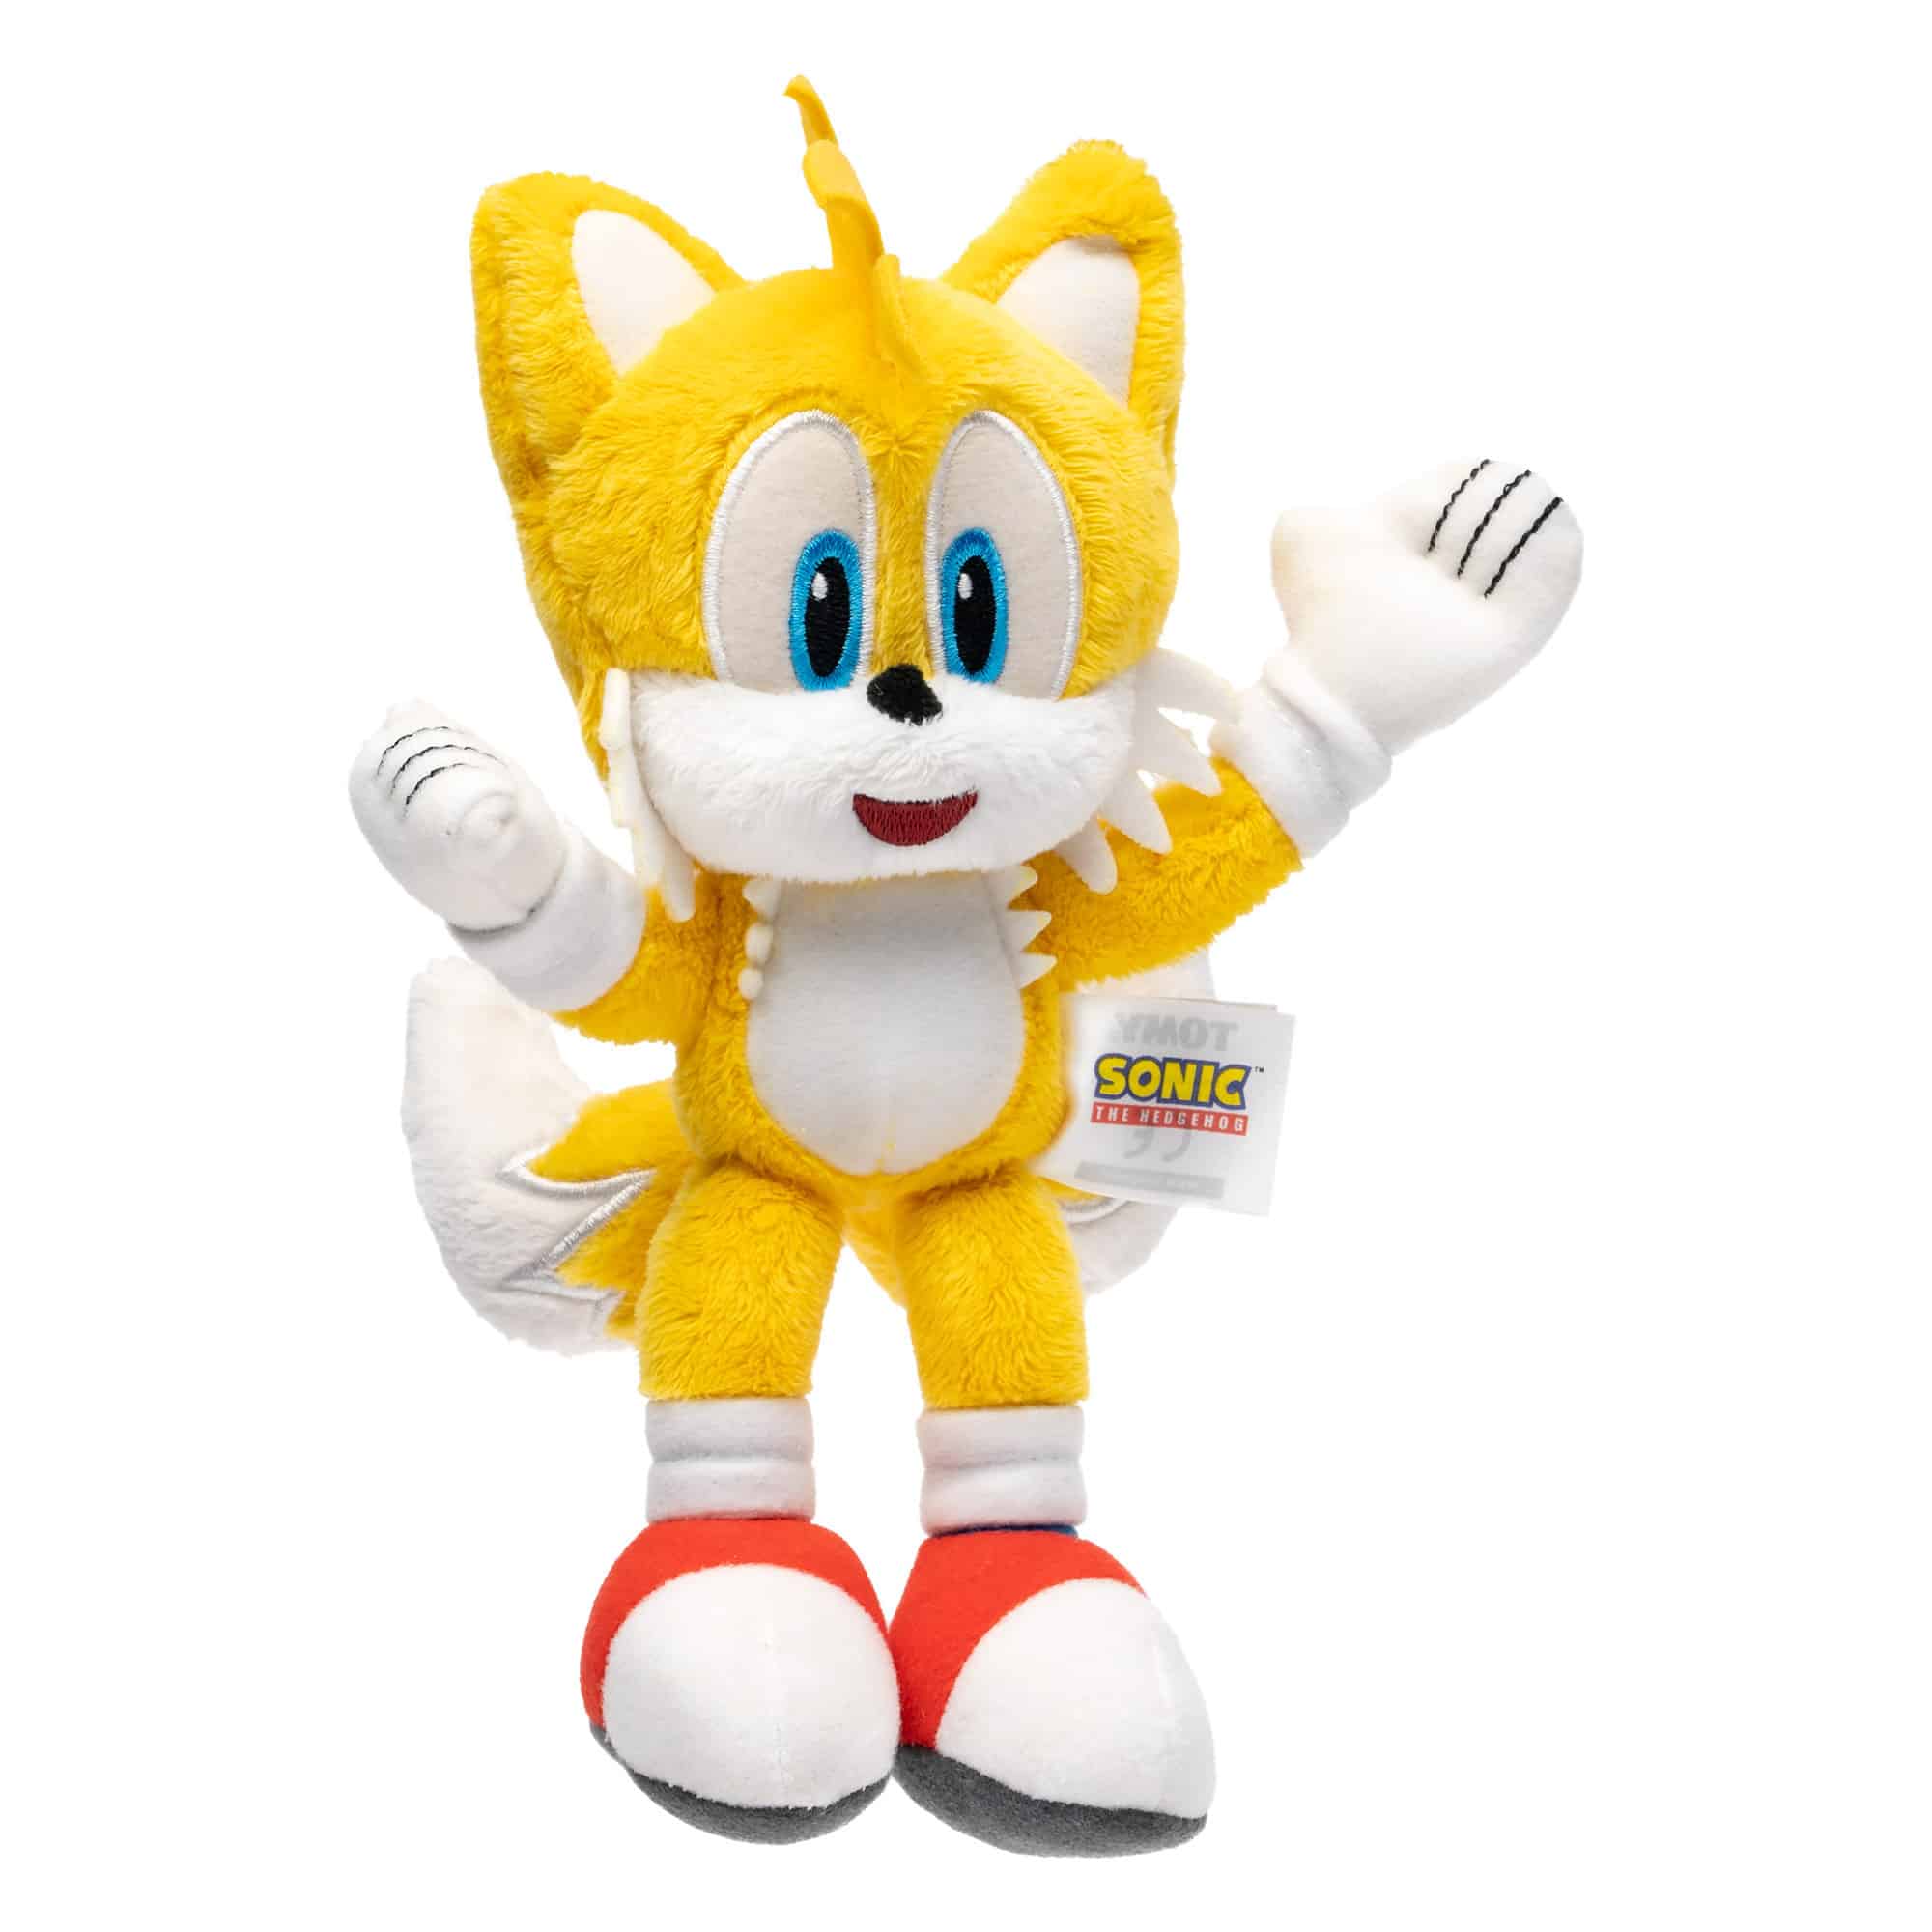 Sonic The Hedgehog - Collector Series Plush